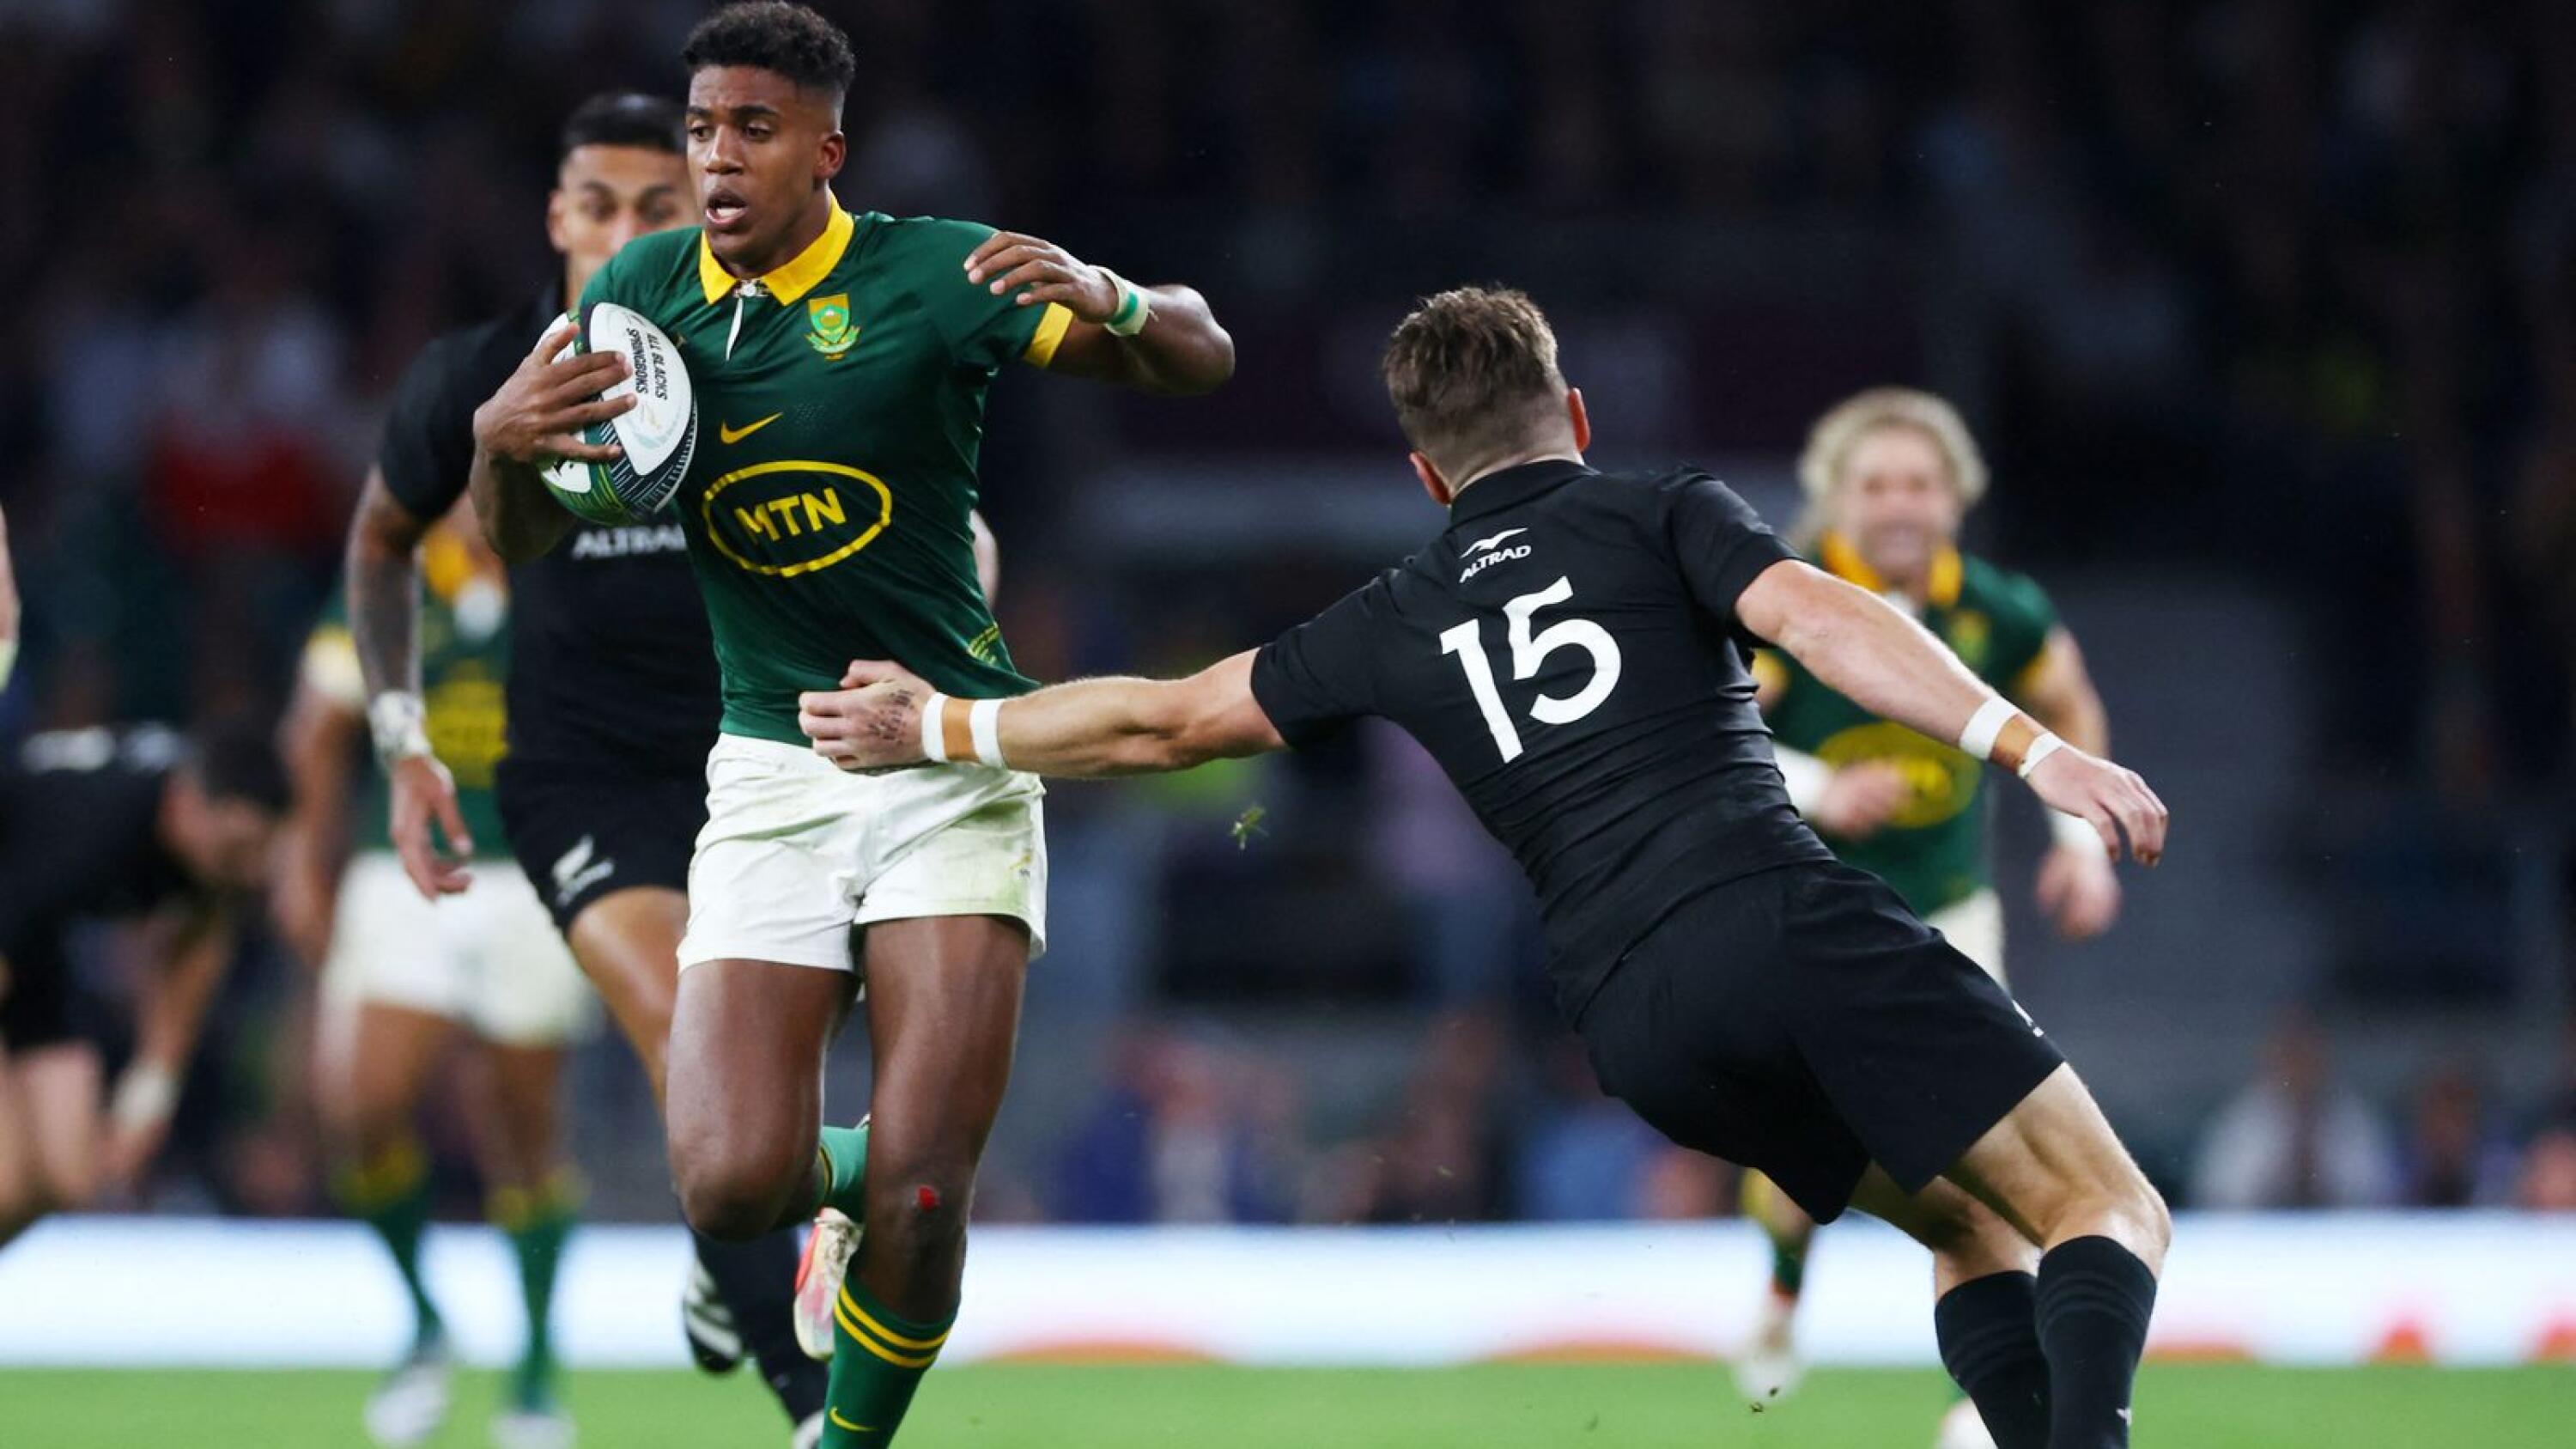 Springboks star Canan Moodie goes on the run against the All Blacks.